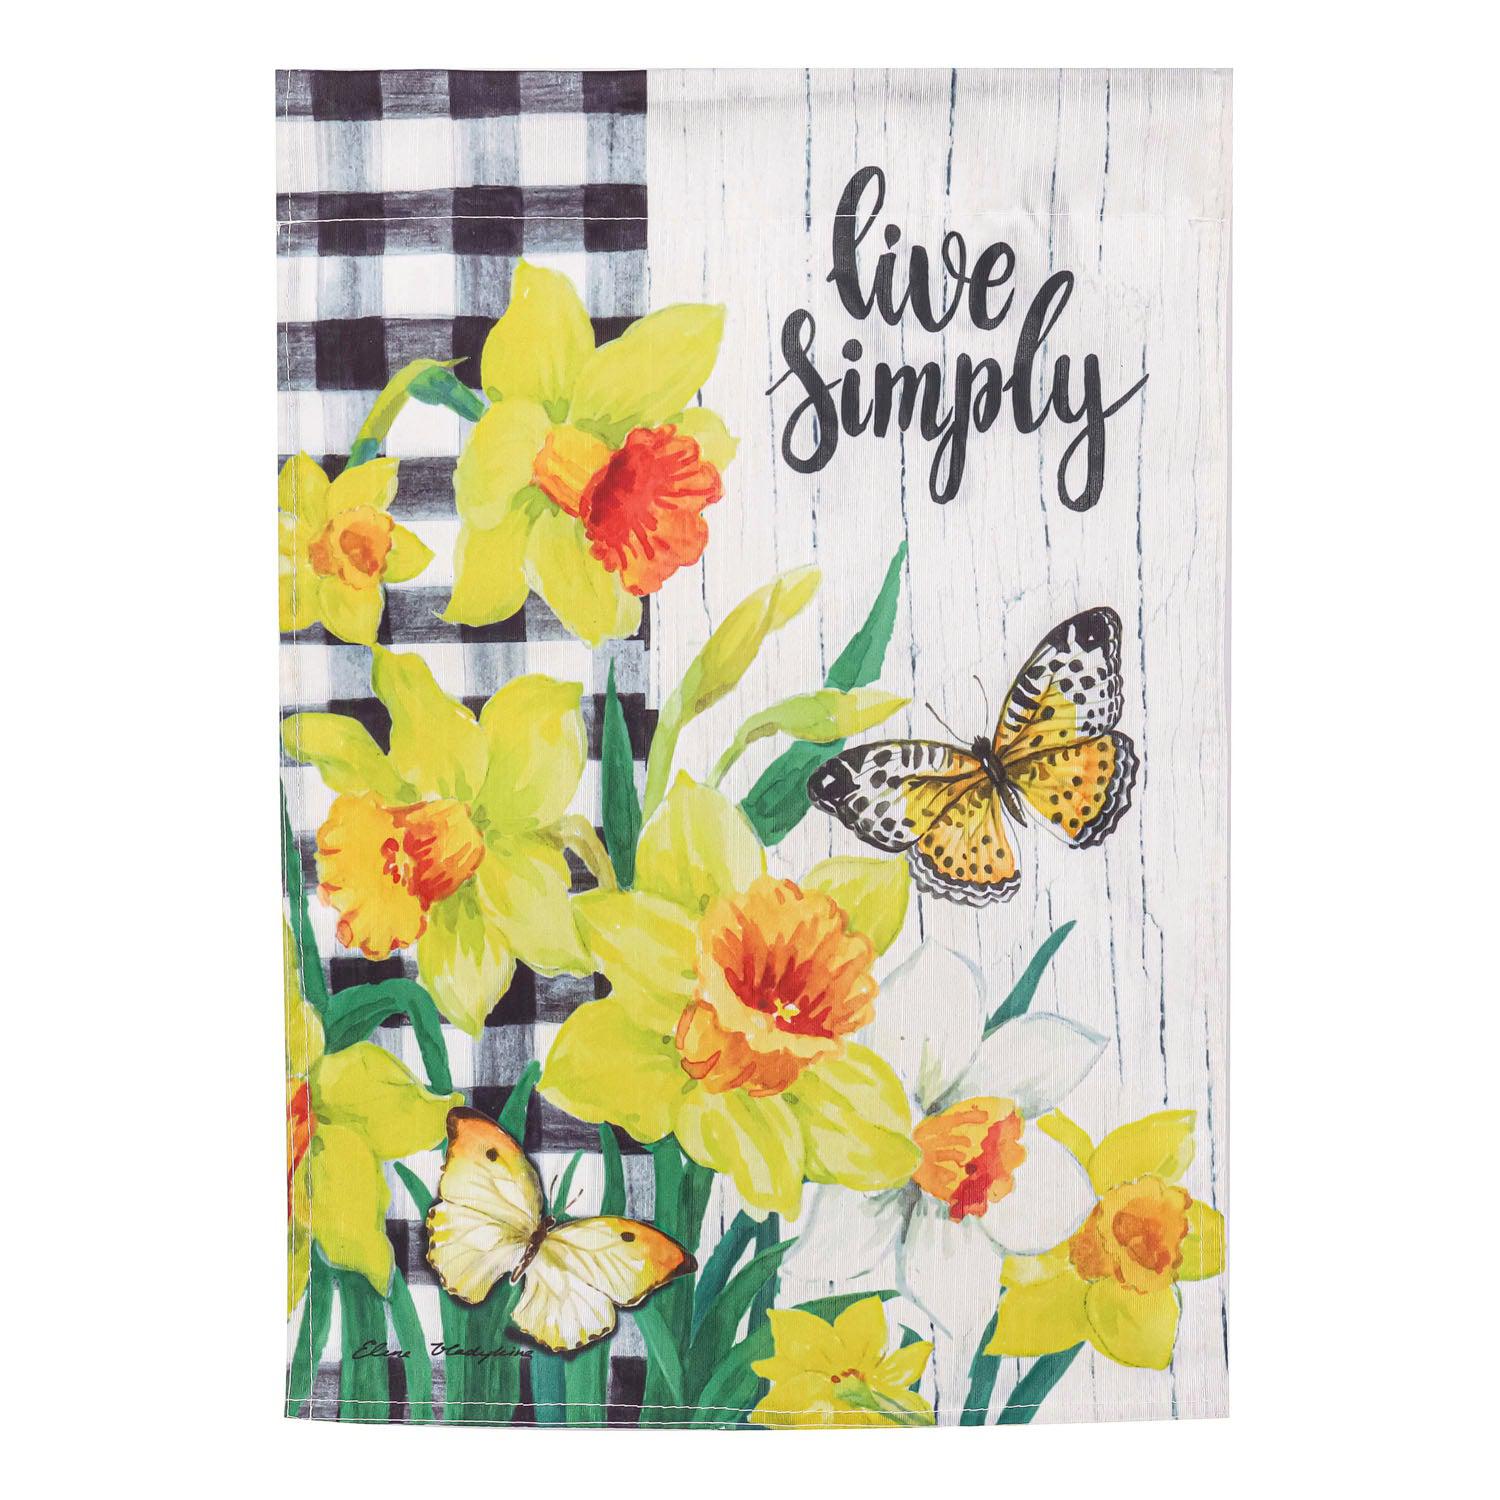 The Spring Daffodils Inspirational Check garden flag features yellow daffodils,  butterflies and the words "Live Simply".